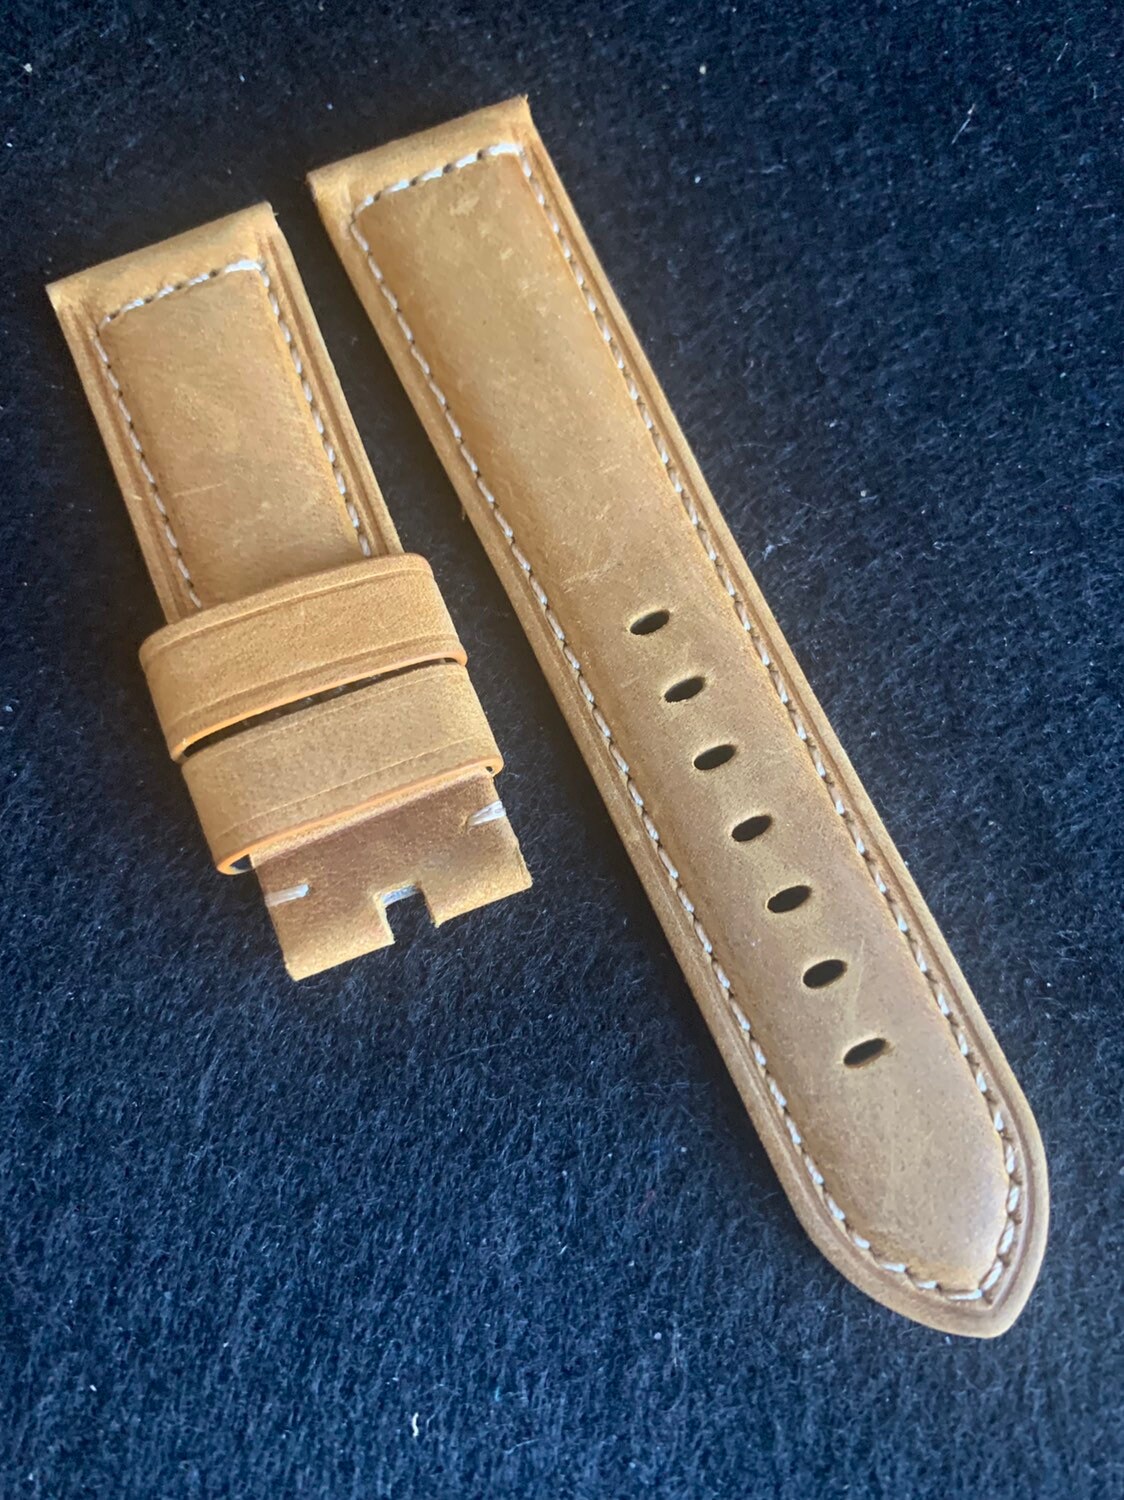 24mm Panerai Tan/Beige Assolutemente distressed style Leather | Etsy